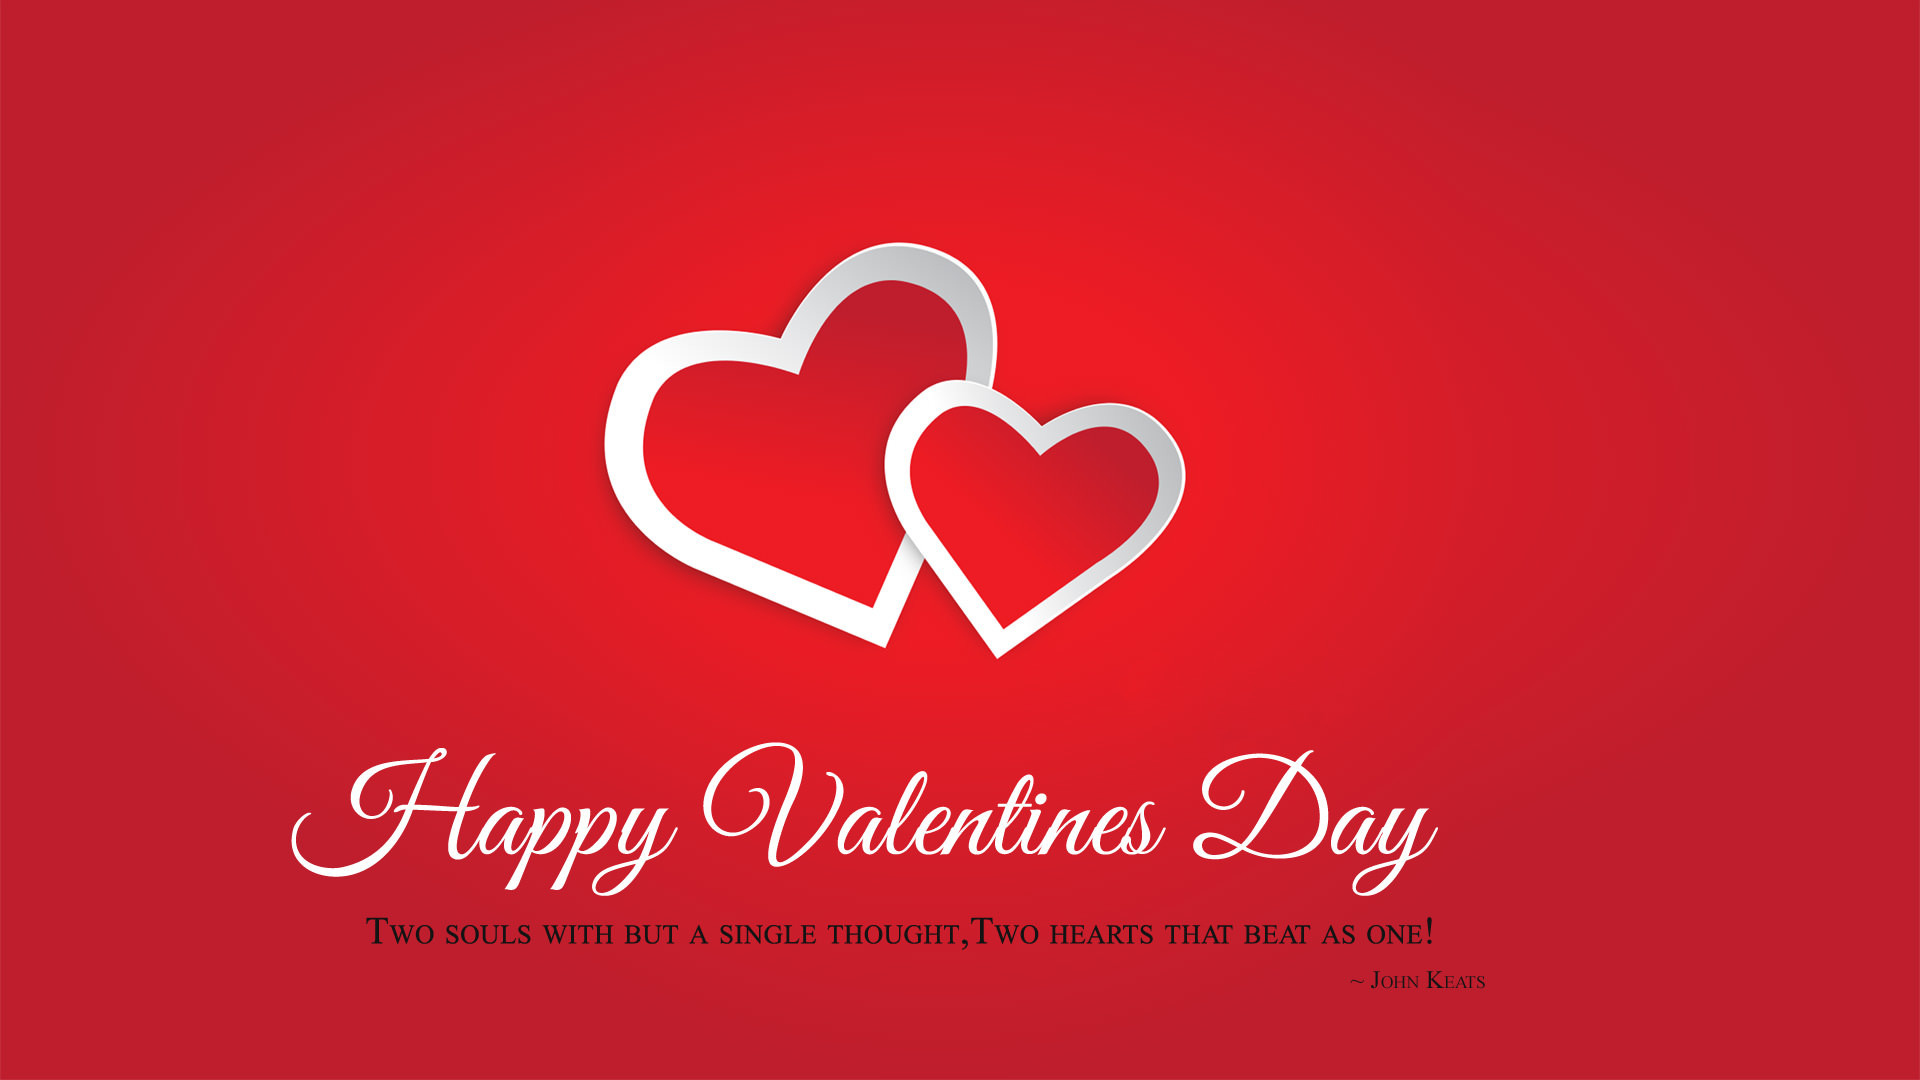 14 Feb Happy Valentines Day Wallpaper Free Hd Love Images Special Valentine Wallpaper 1920x1080